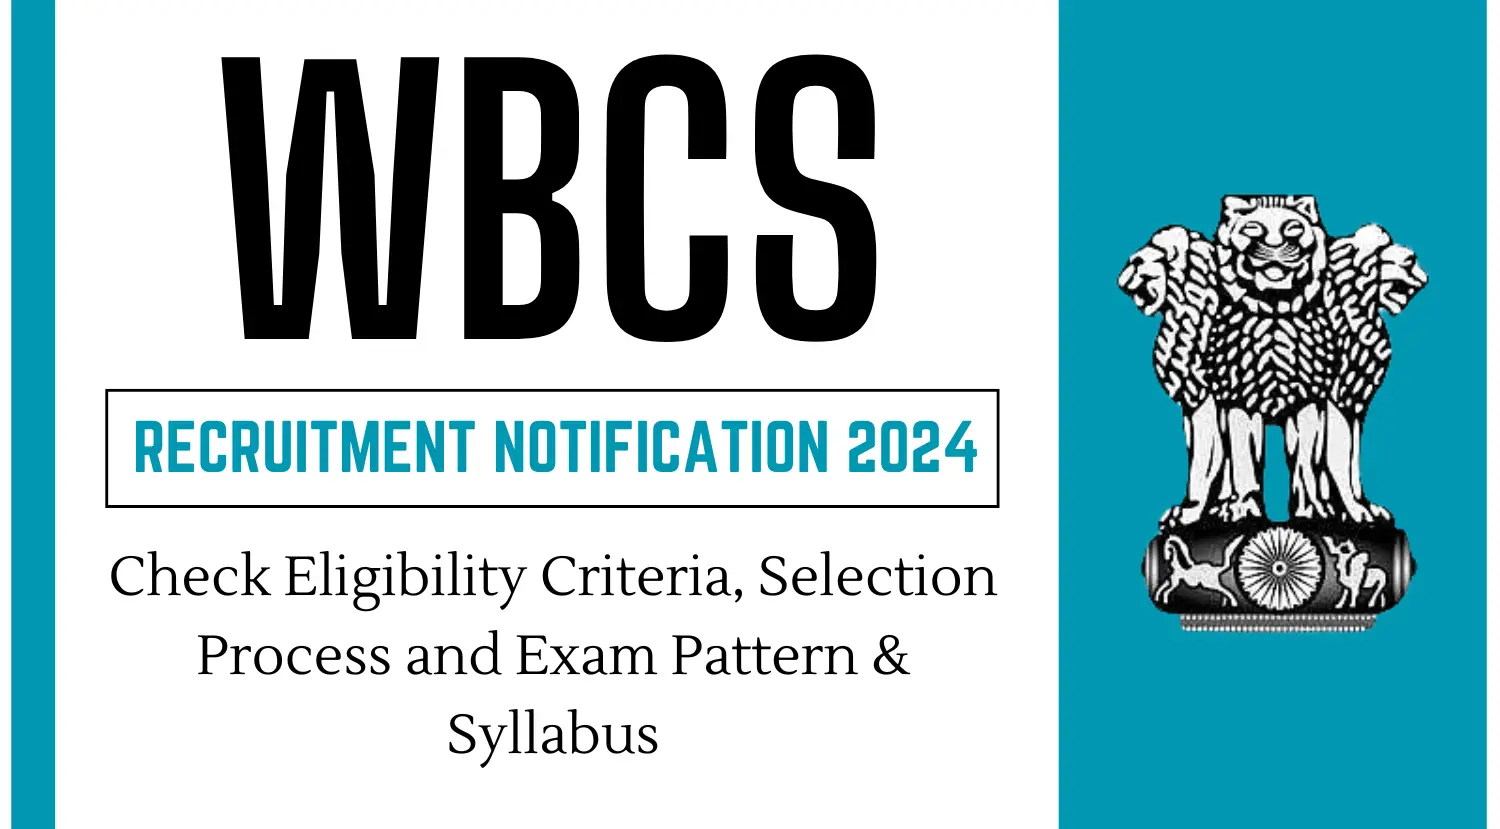 WBCS 2024 Notification, Check Eligibility, Exam Pattern, Selection Process and Application Process